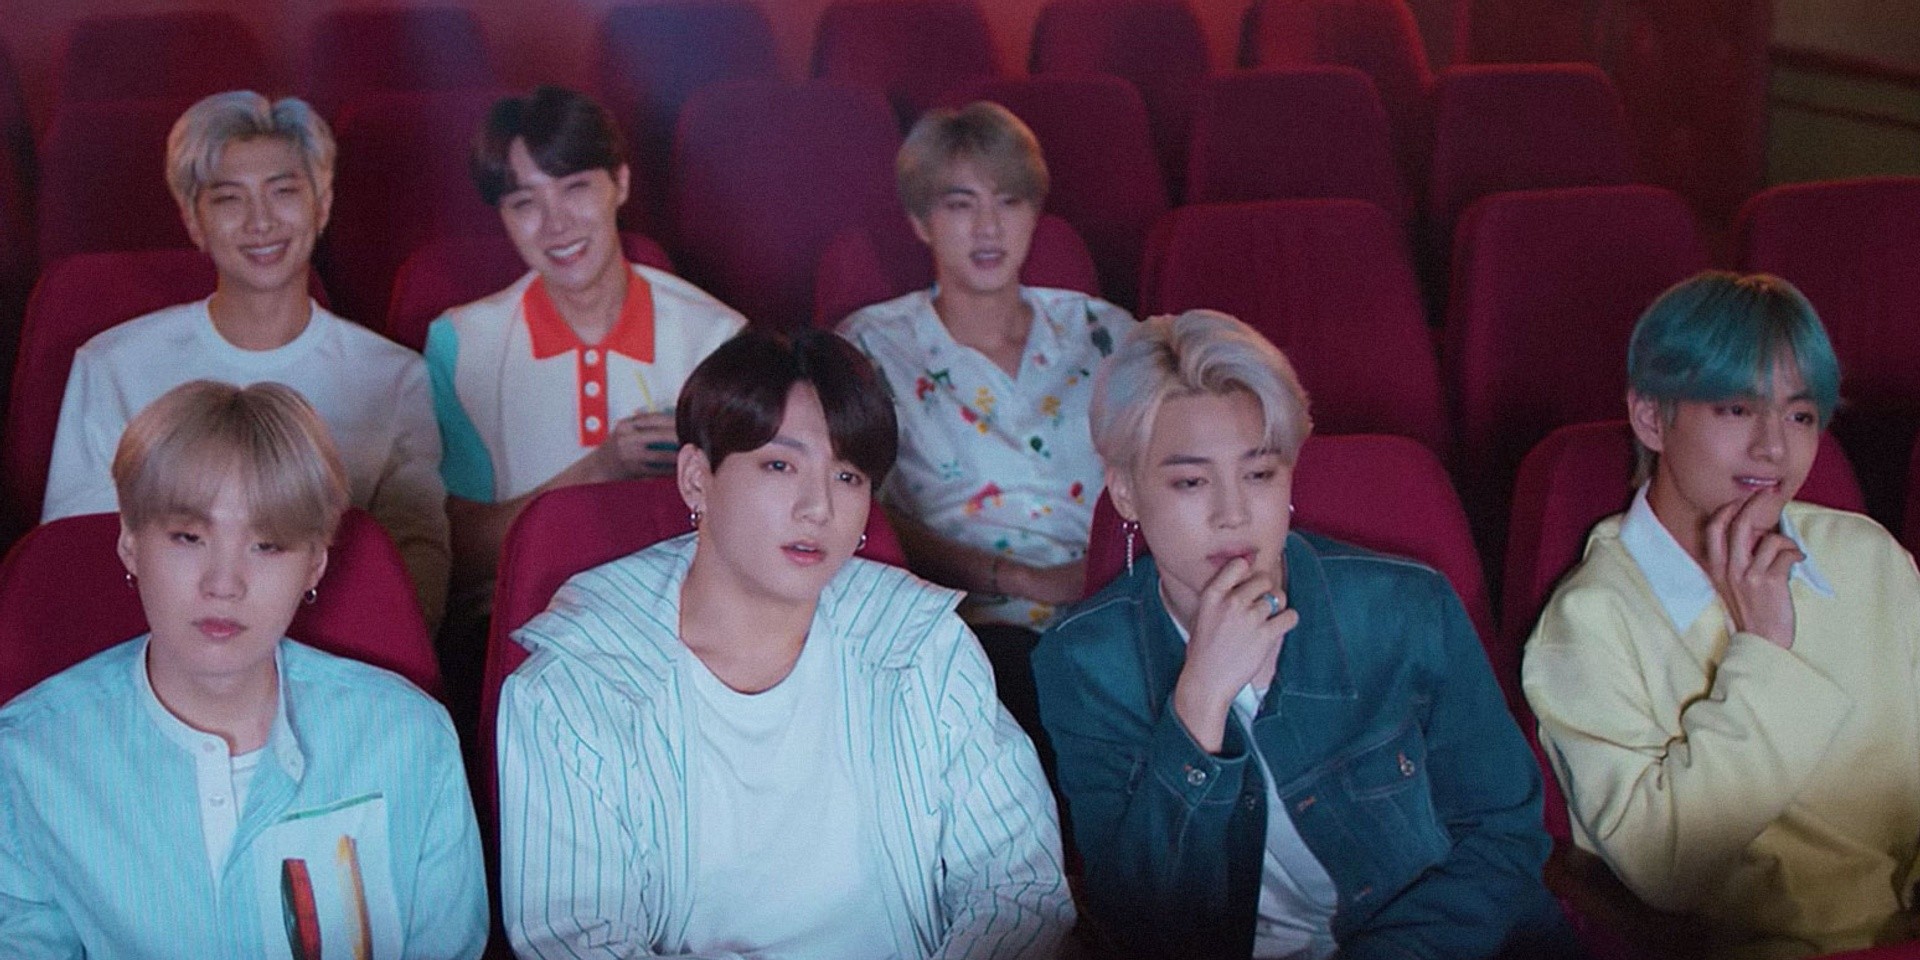 BTS releases Japanese song and music video, ‘Lights’ – watch